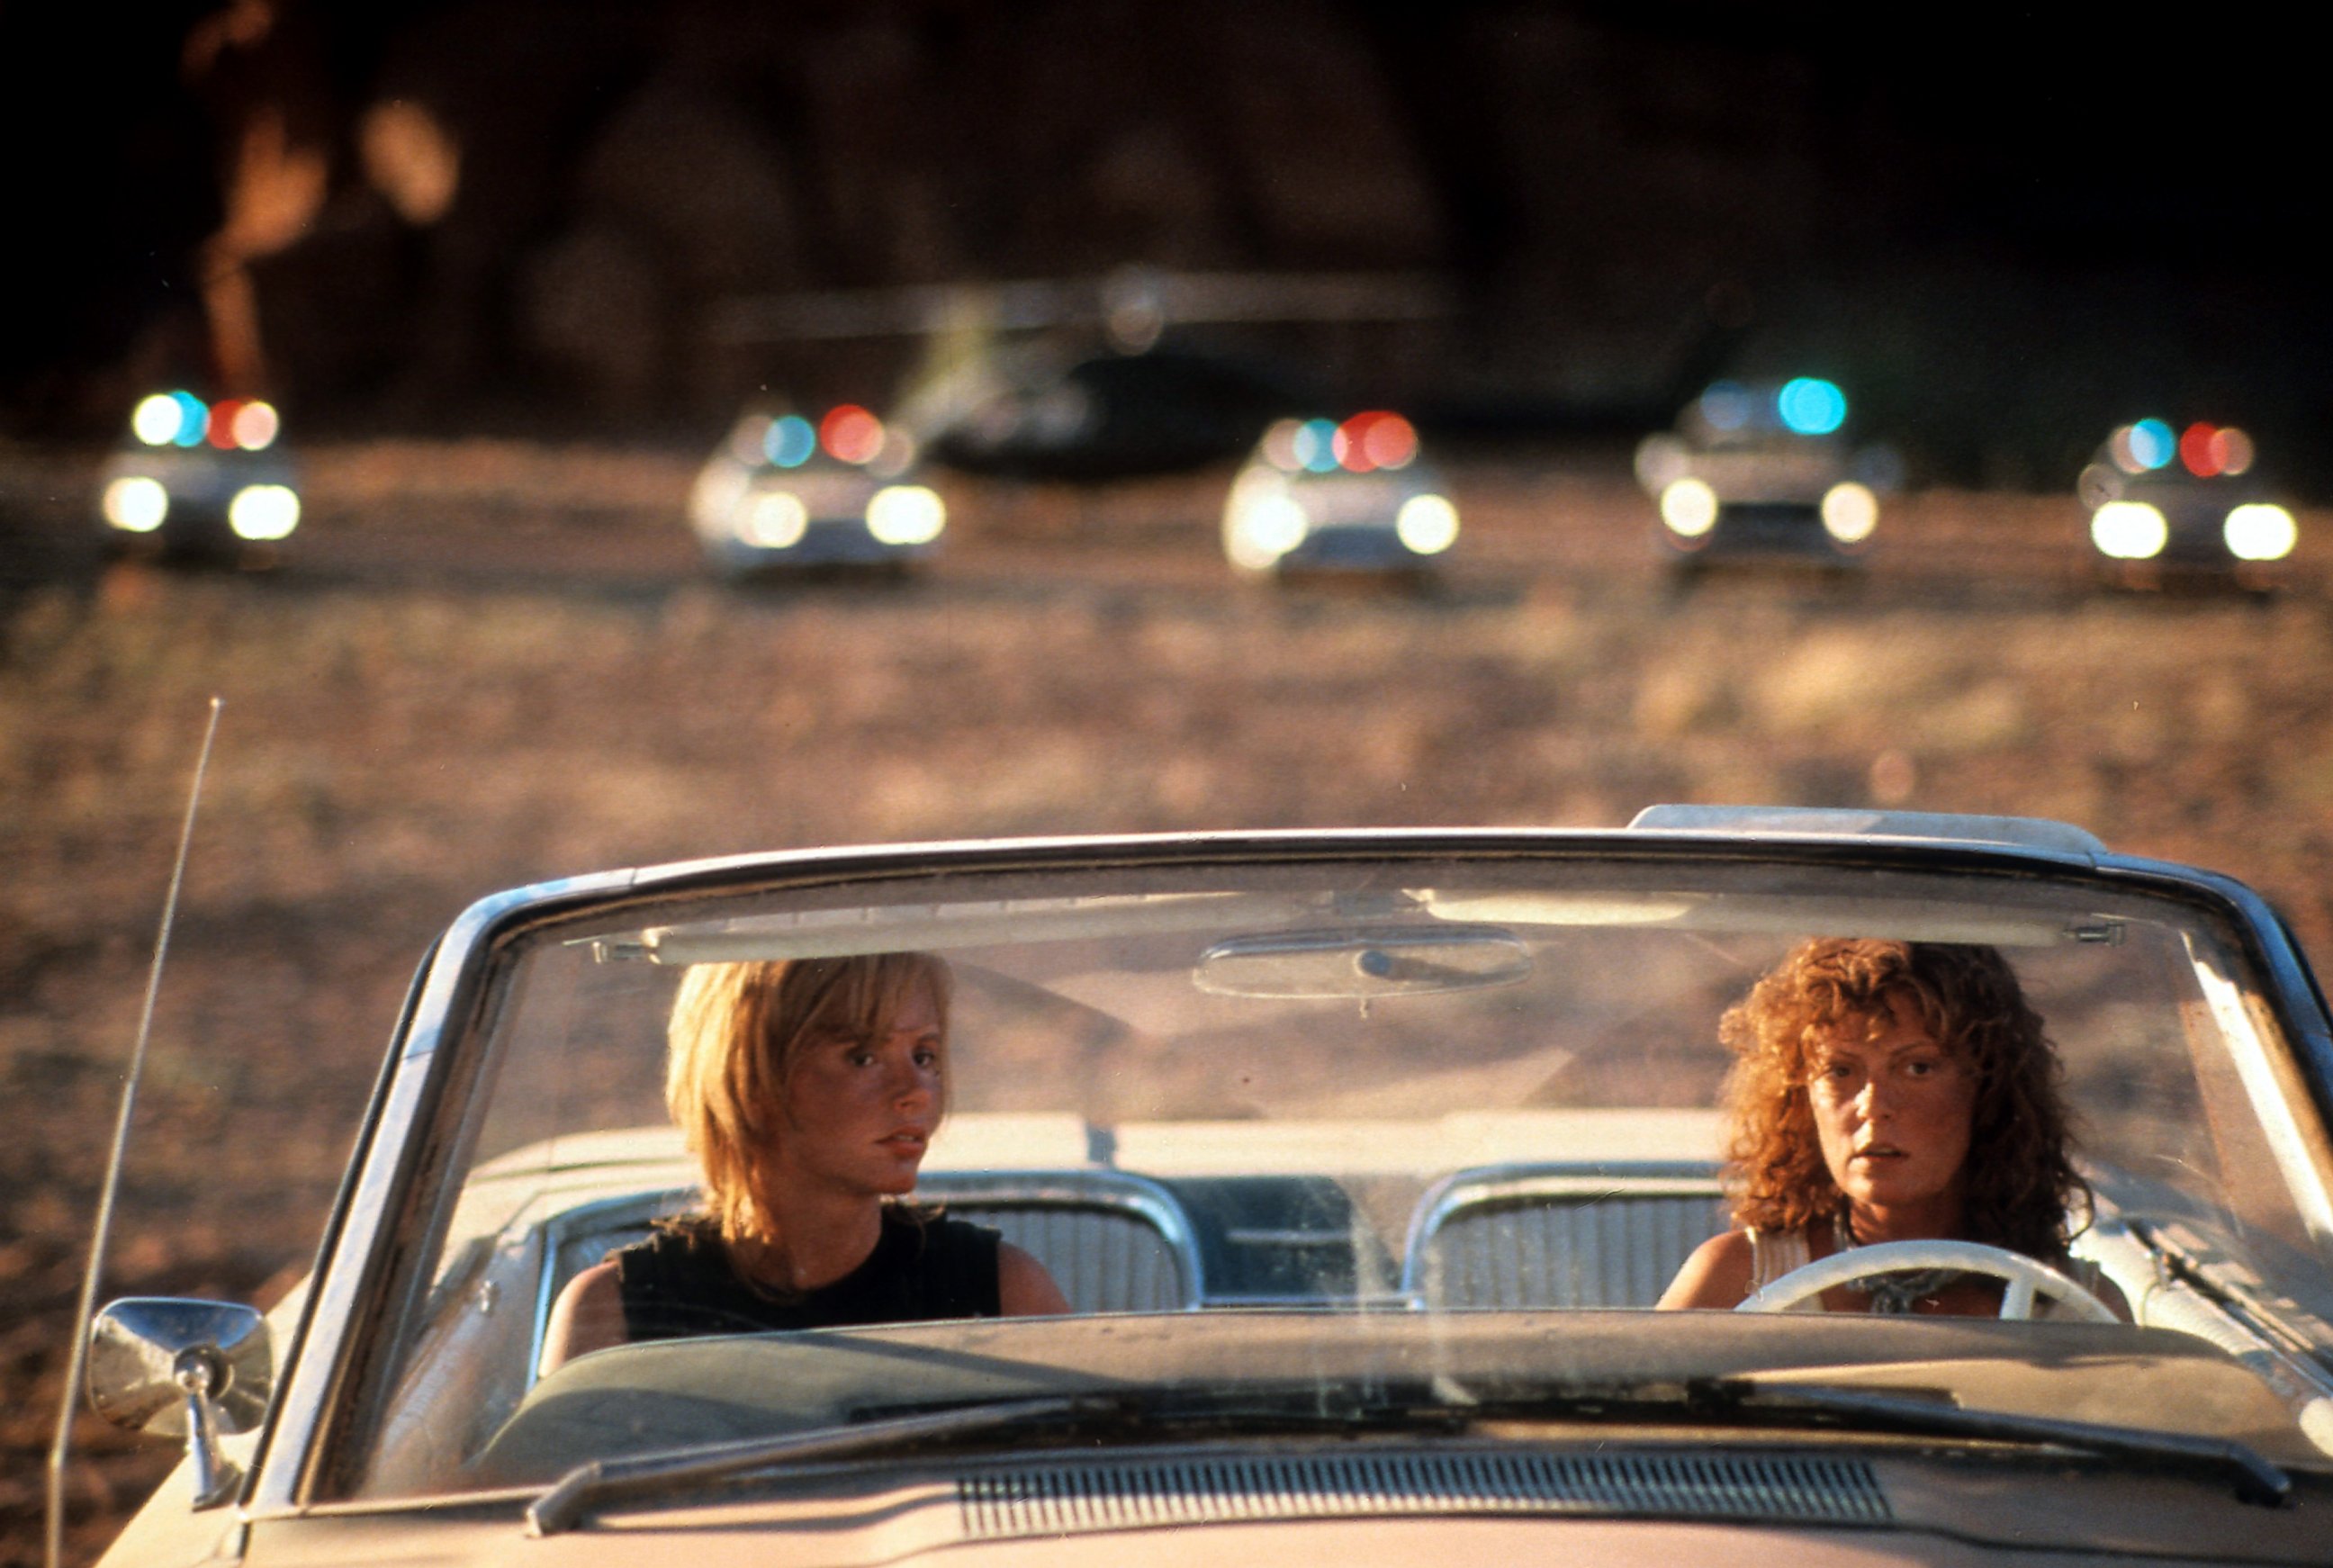 PHOTO: Geena Davis and Susan Sarandon sitting in their convertible with squad cars behind them in a scene from the film 'Thelma & Louise' in 1991.